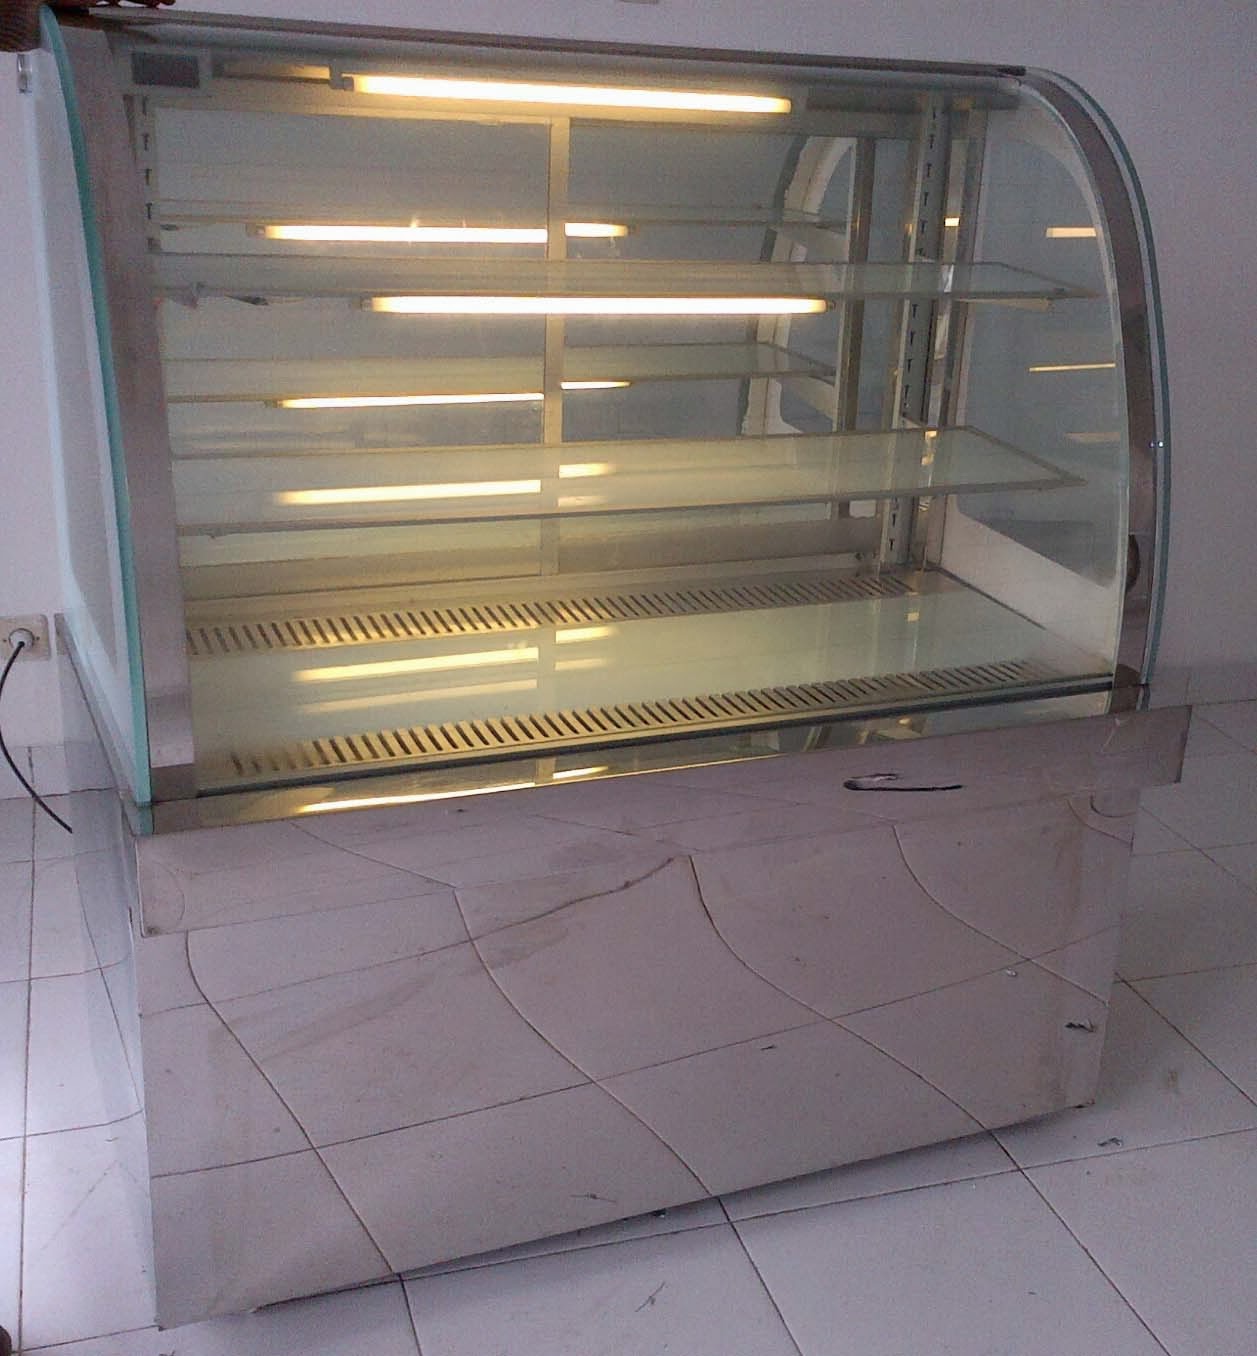 SHOWCASE CAKE STAINLESS STEEL CURVE GLASS